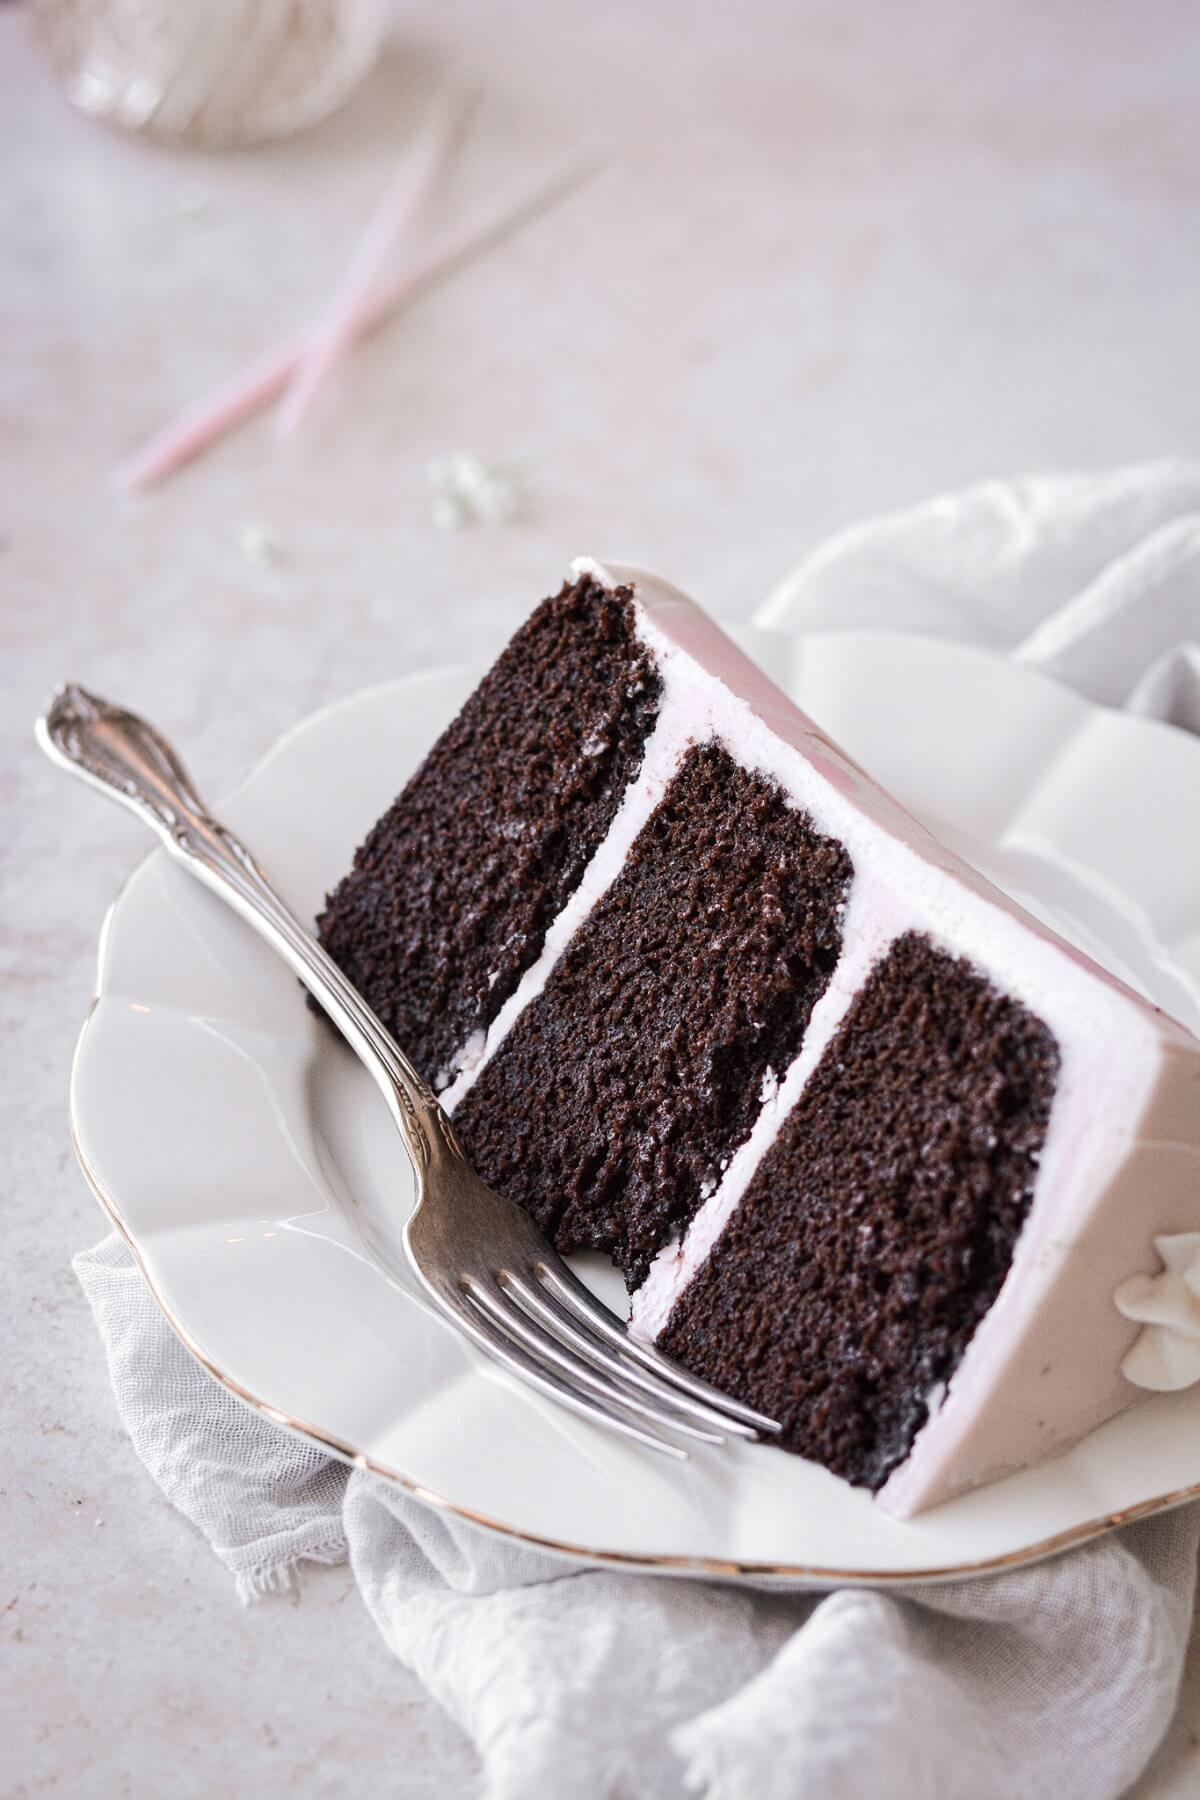 A slice of chocolate cake with pink buttercream.